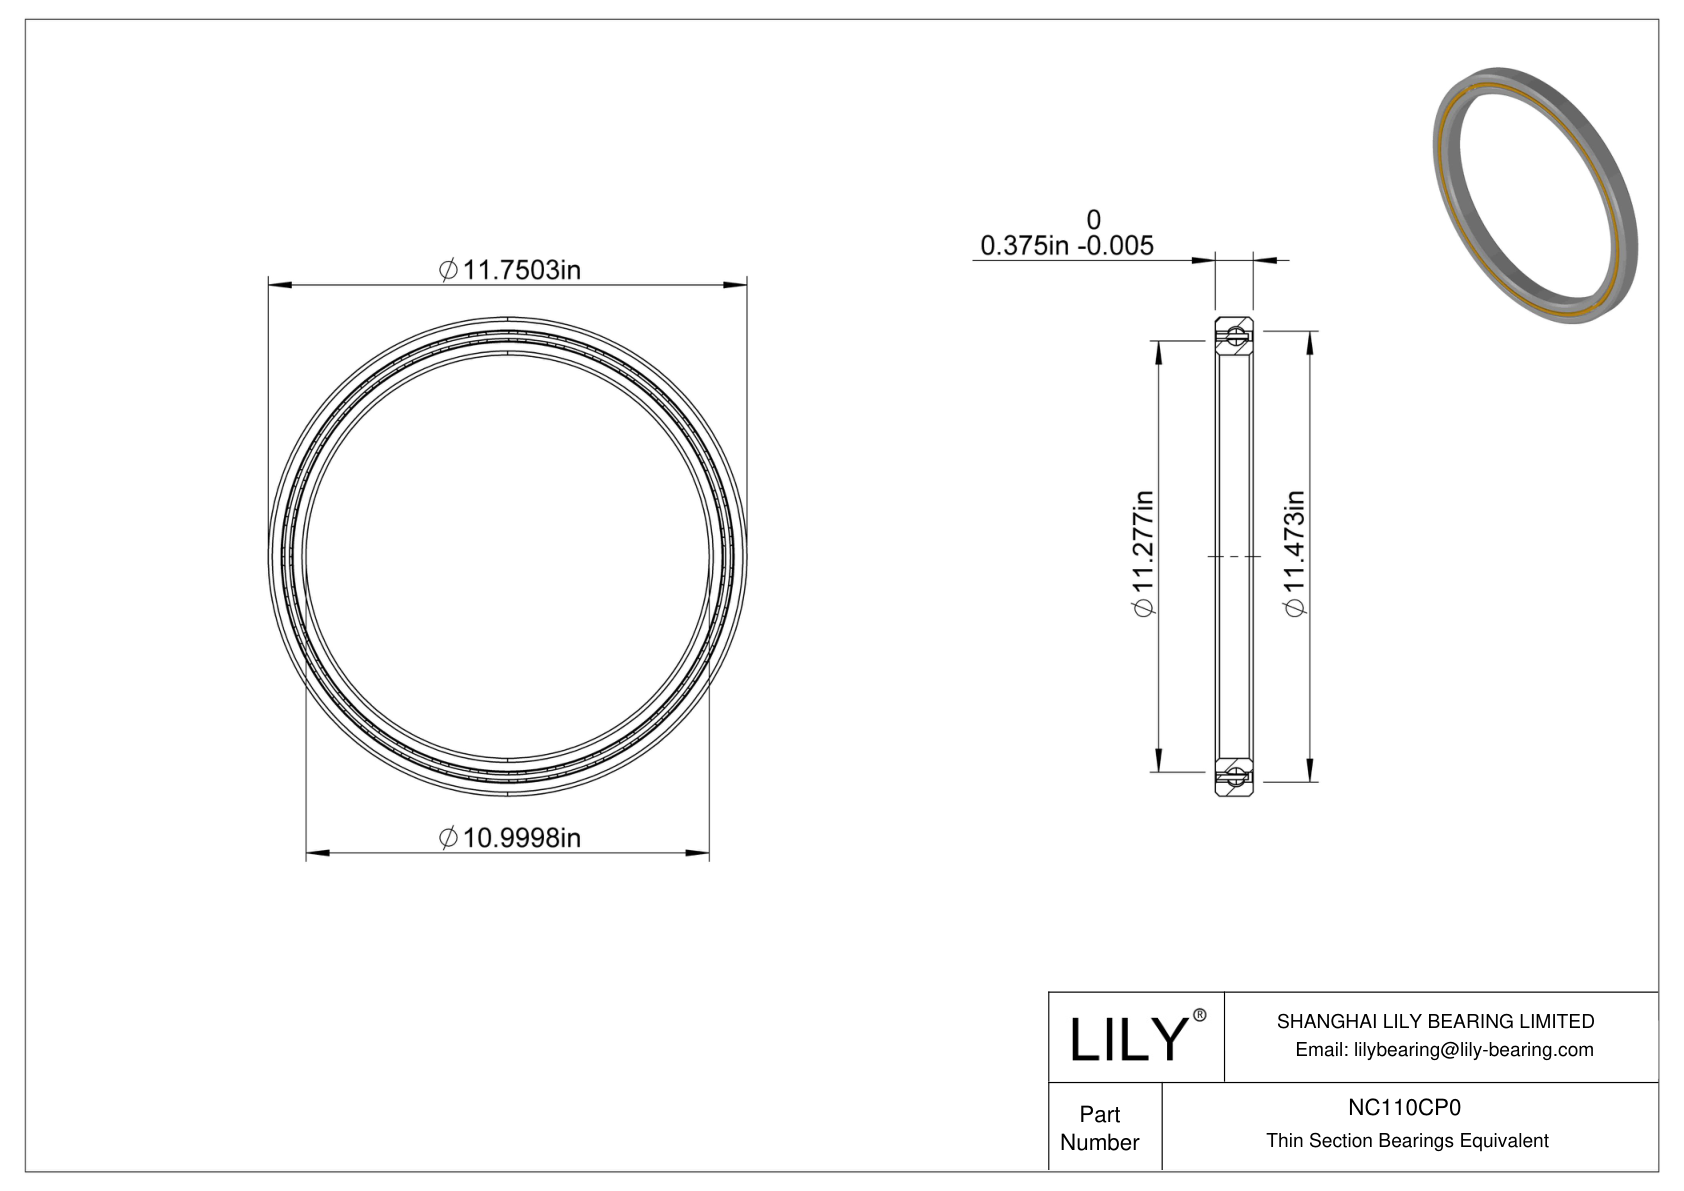 NC110CP0 Constant Section (CS) Bearings cad drawing